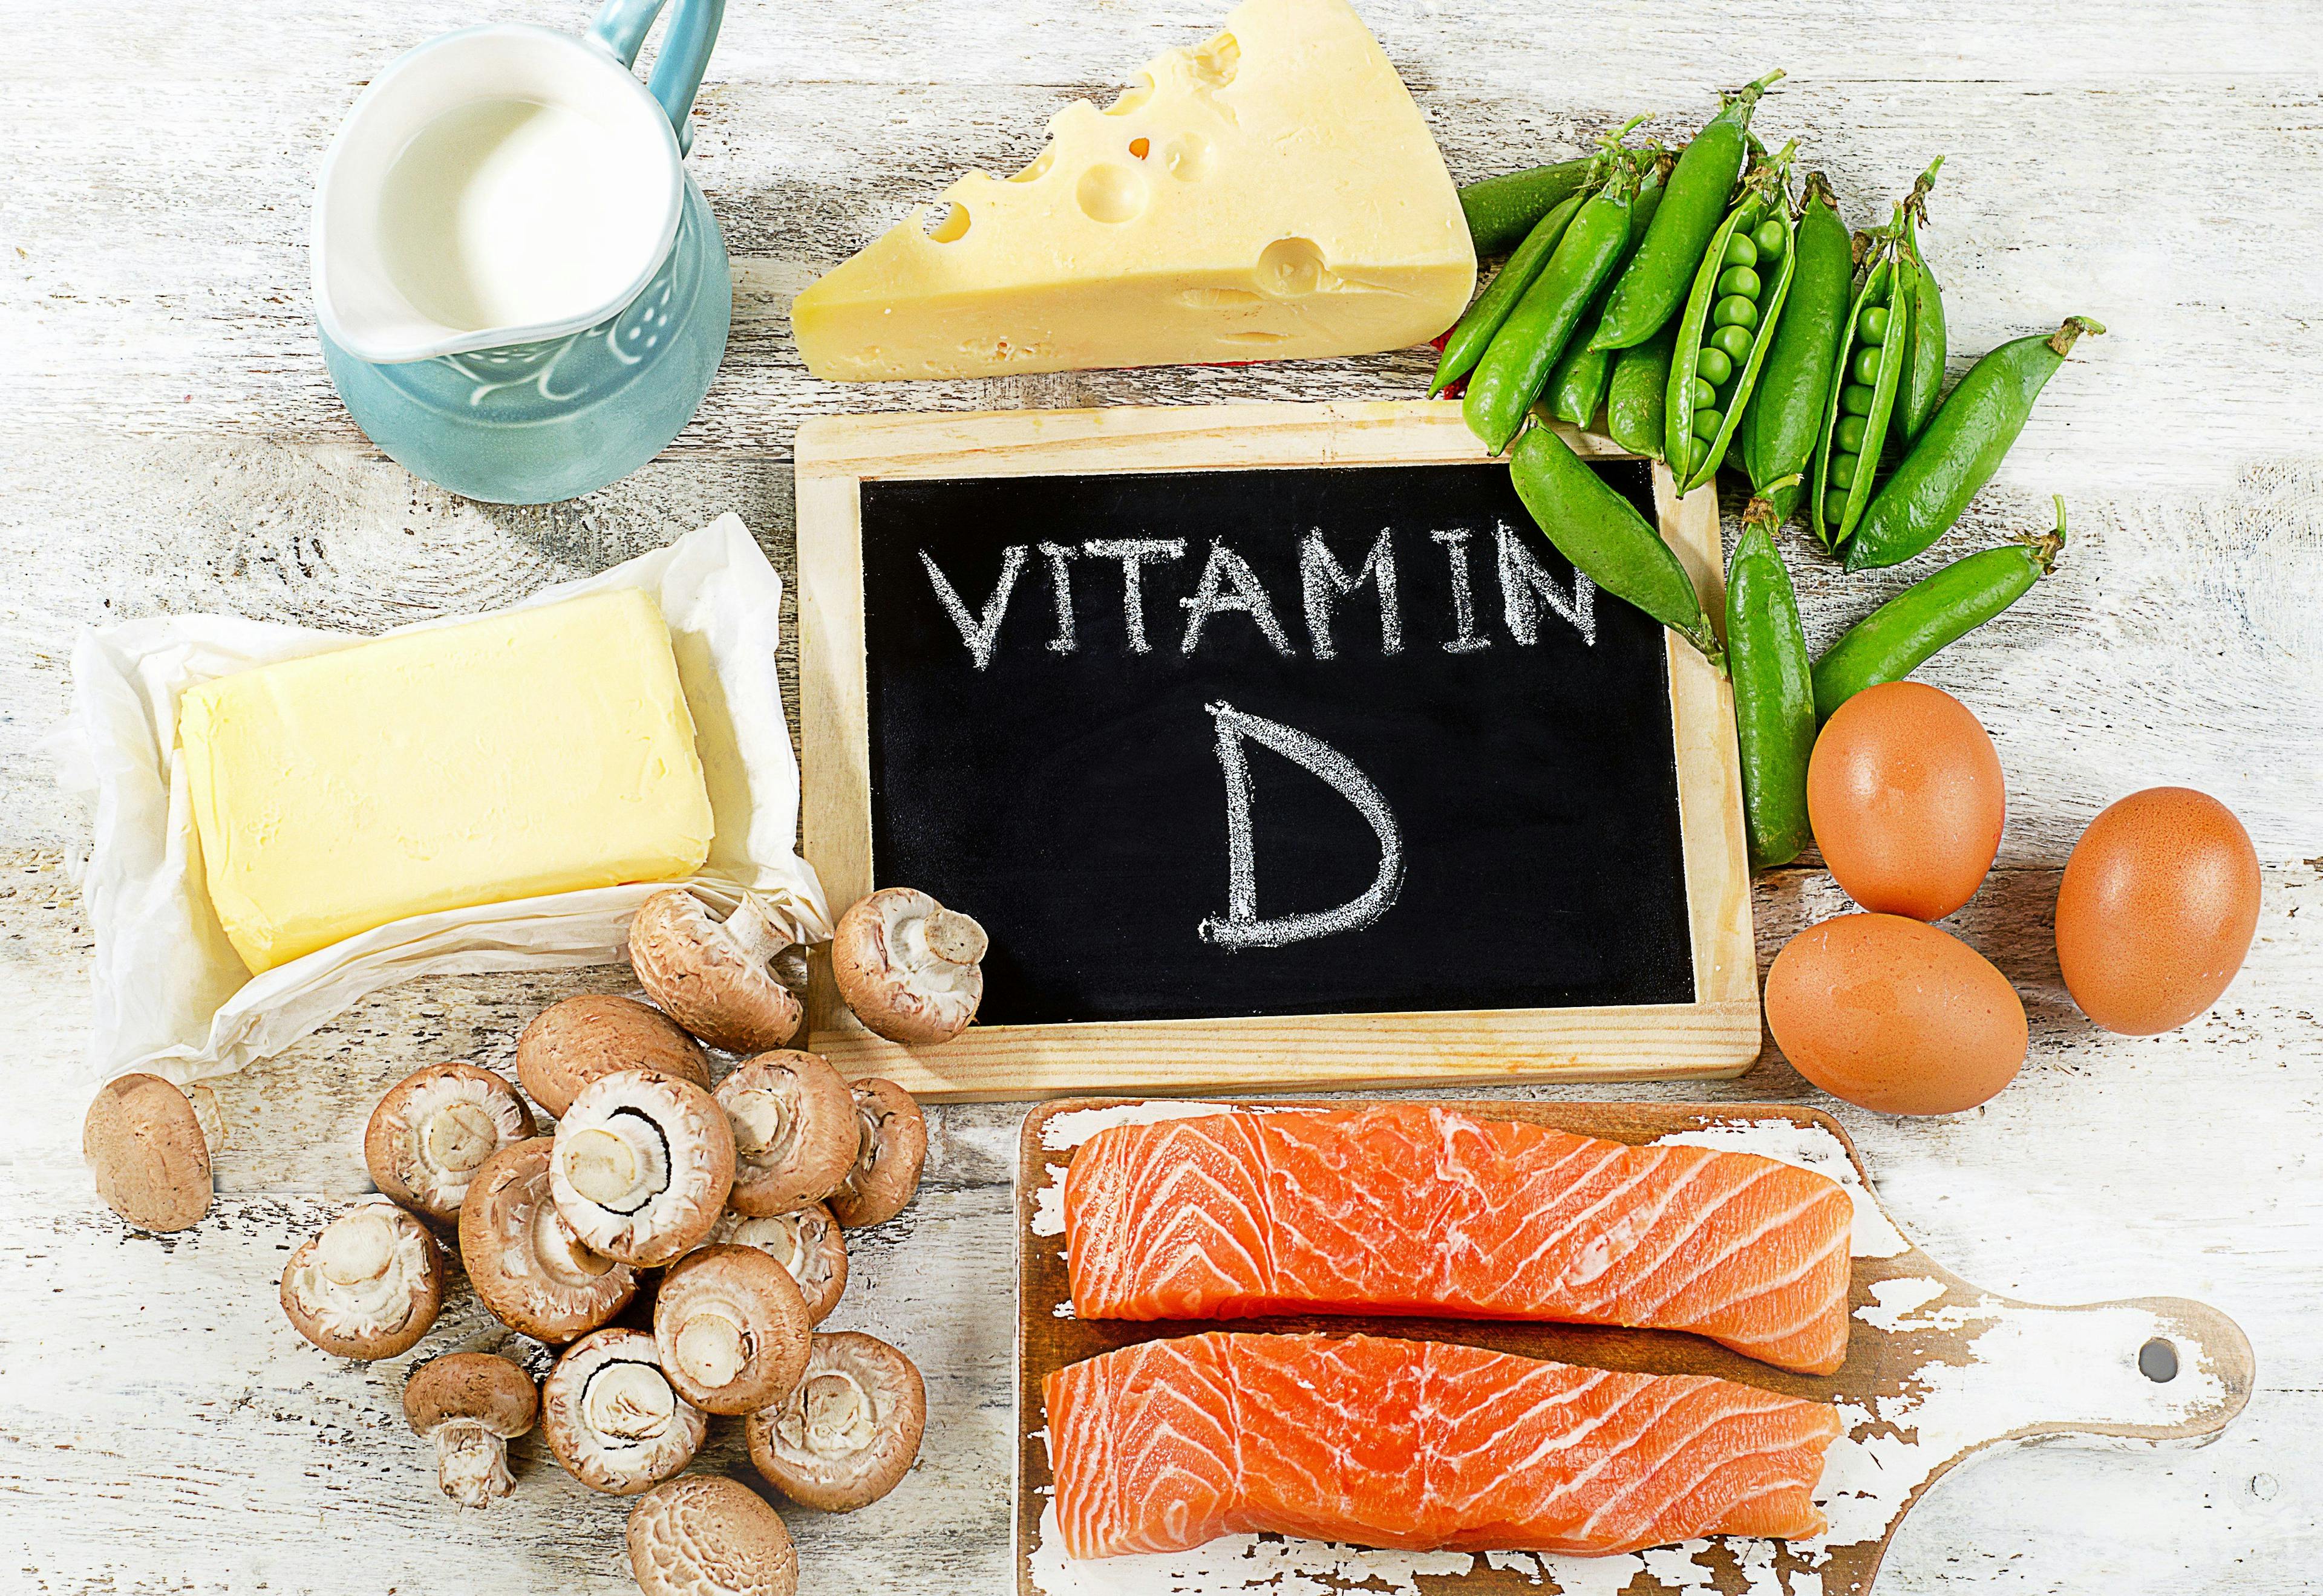 Vitamin D, estradiol, and metabolic syndrome